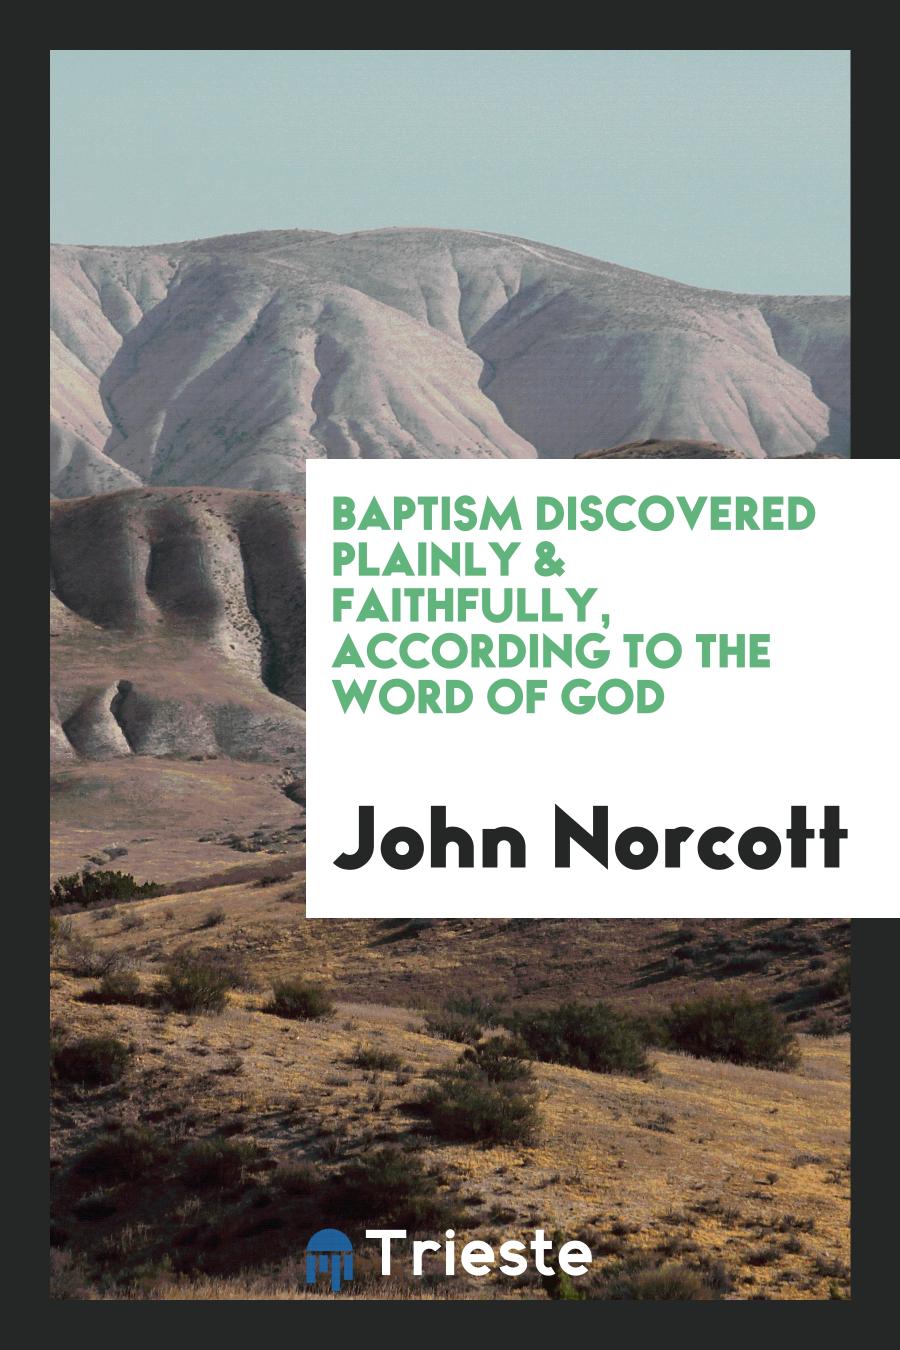 Baptism discovered plainly & faithfully, according to the Word of God